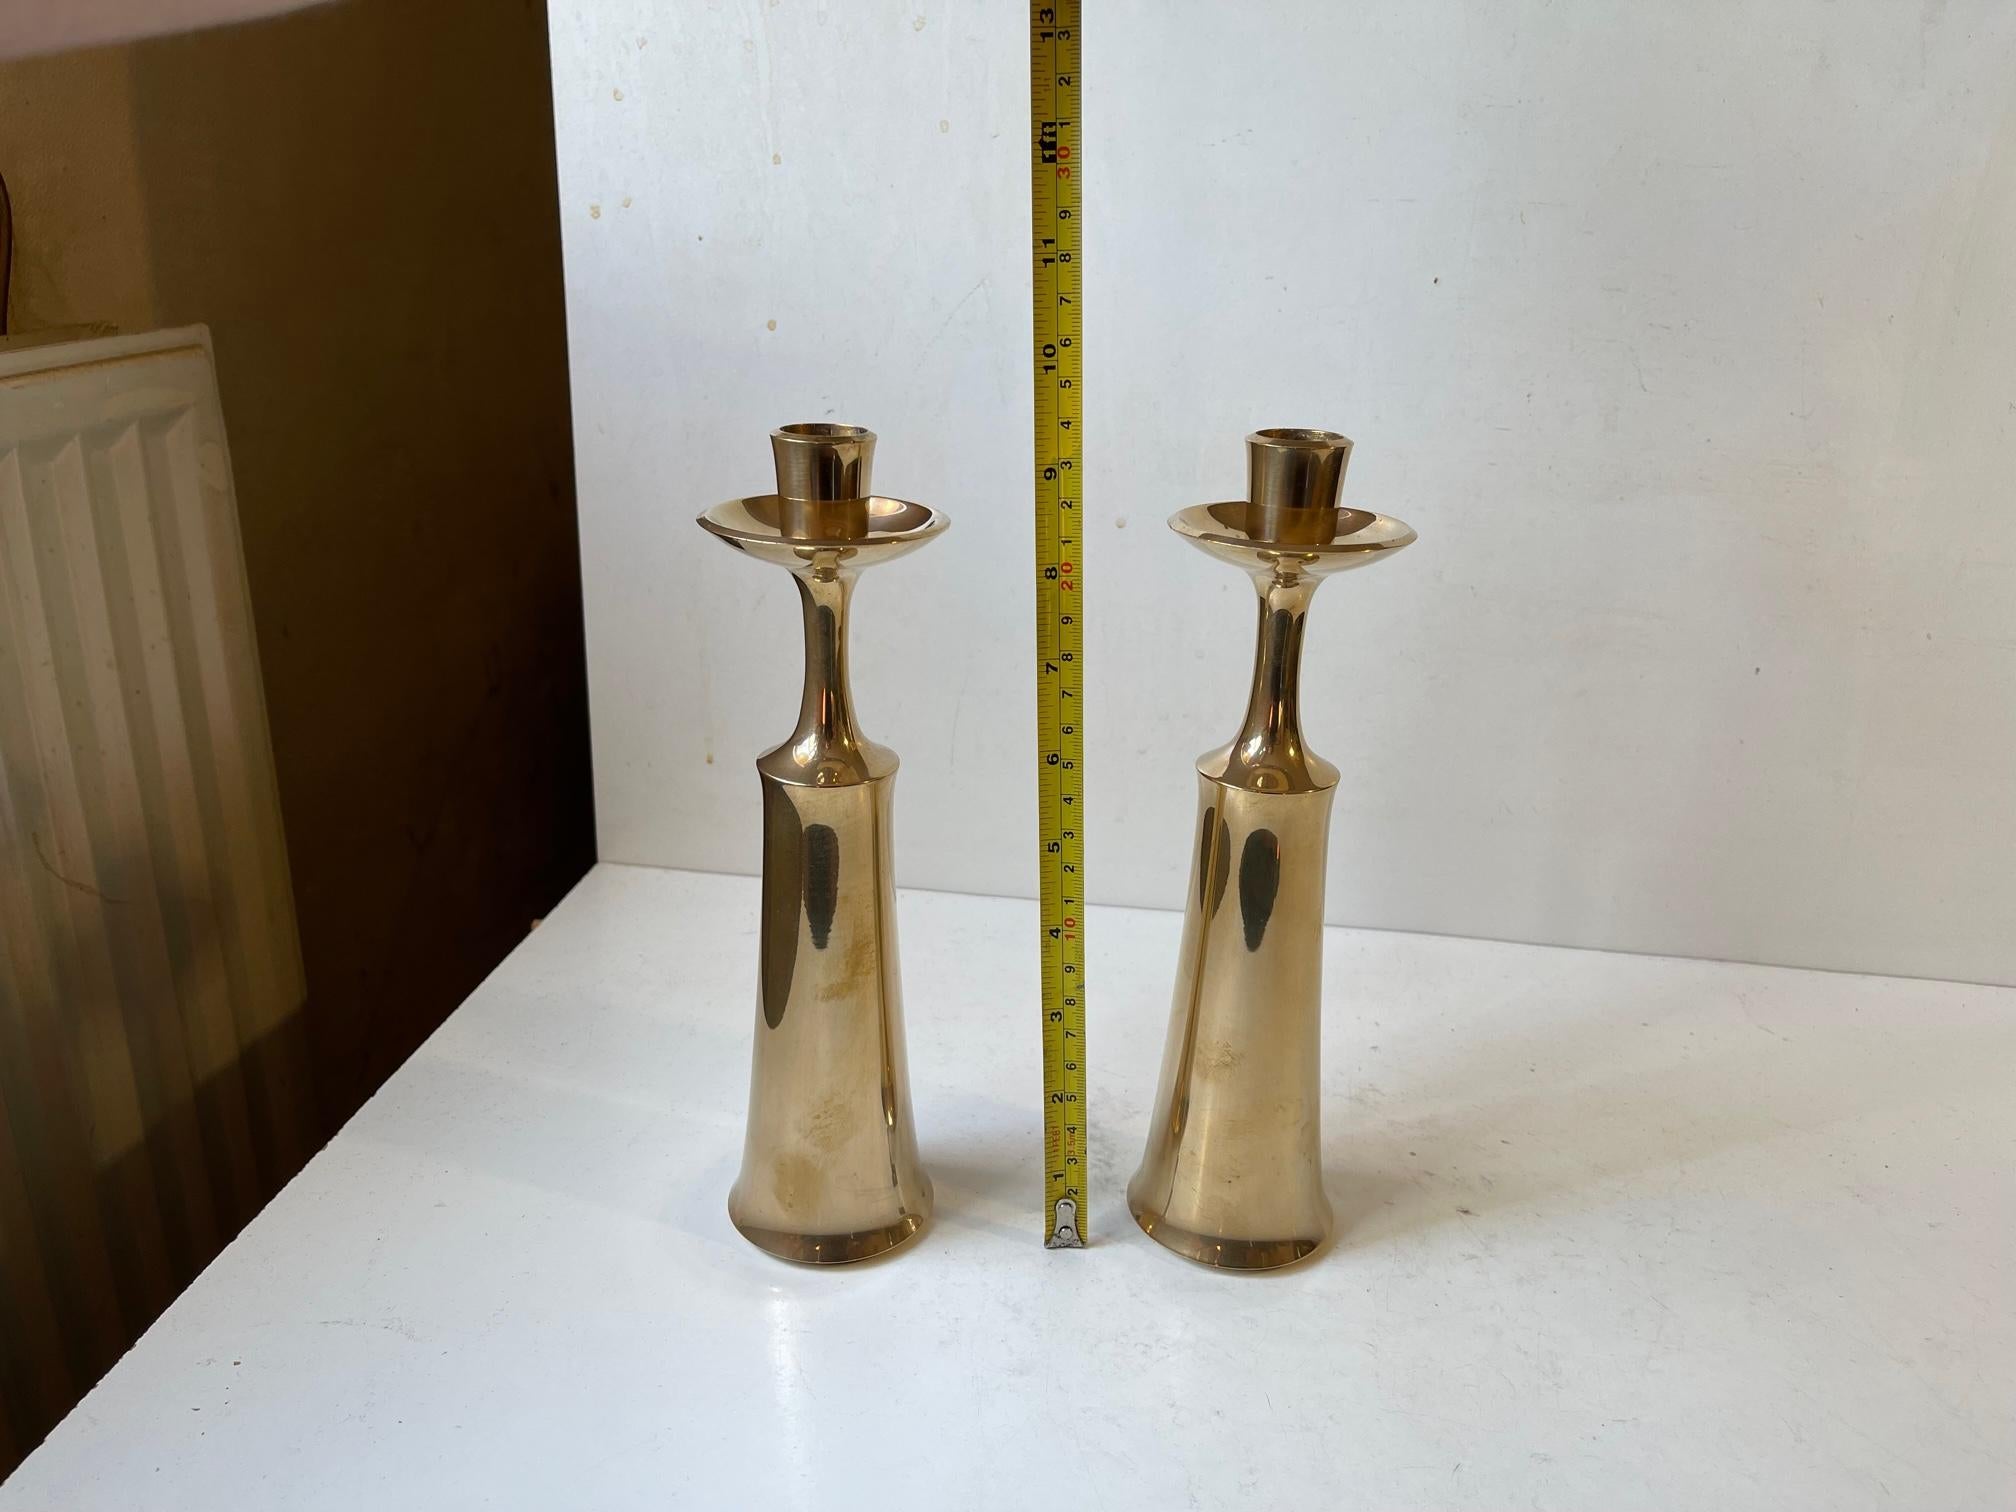 Large Danish Brass Candlesticks by Jens Harald Quistgaard, IHQ, 1960s For Sale 2